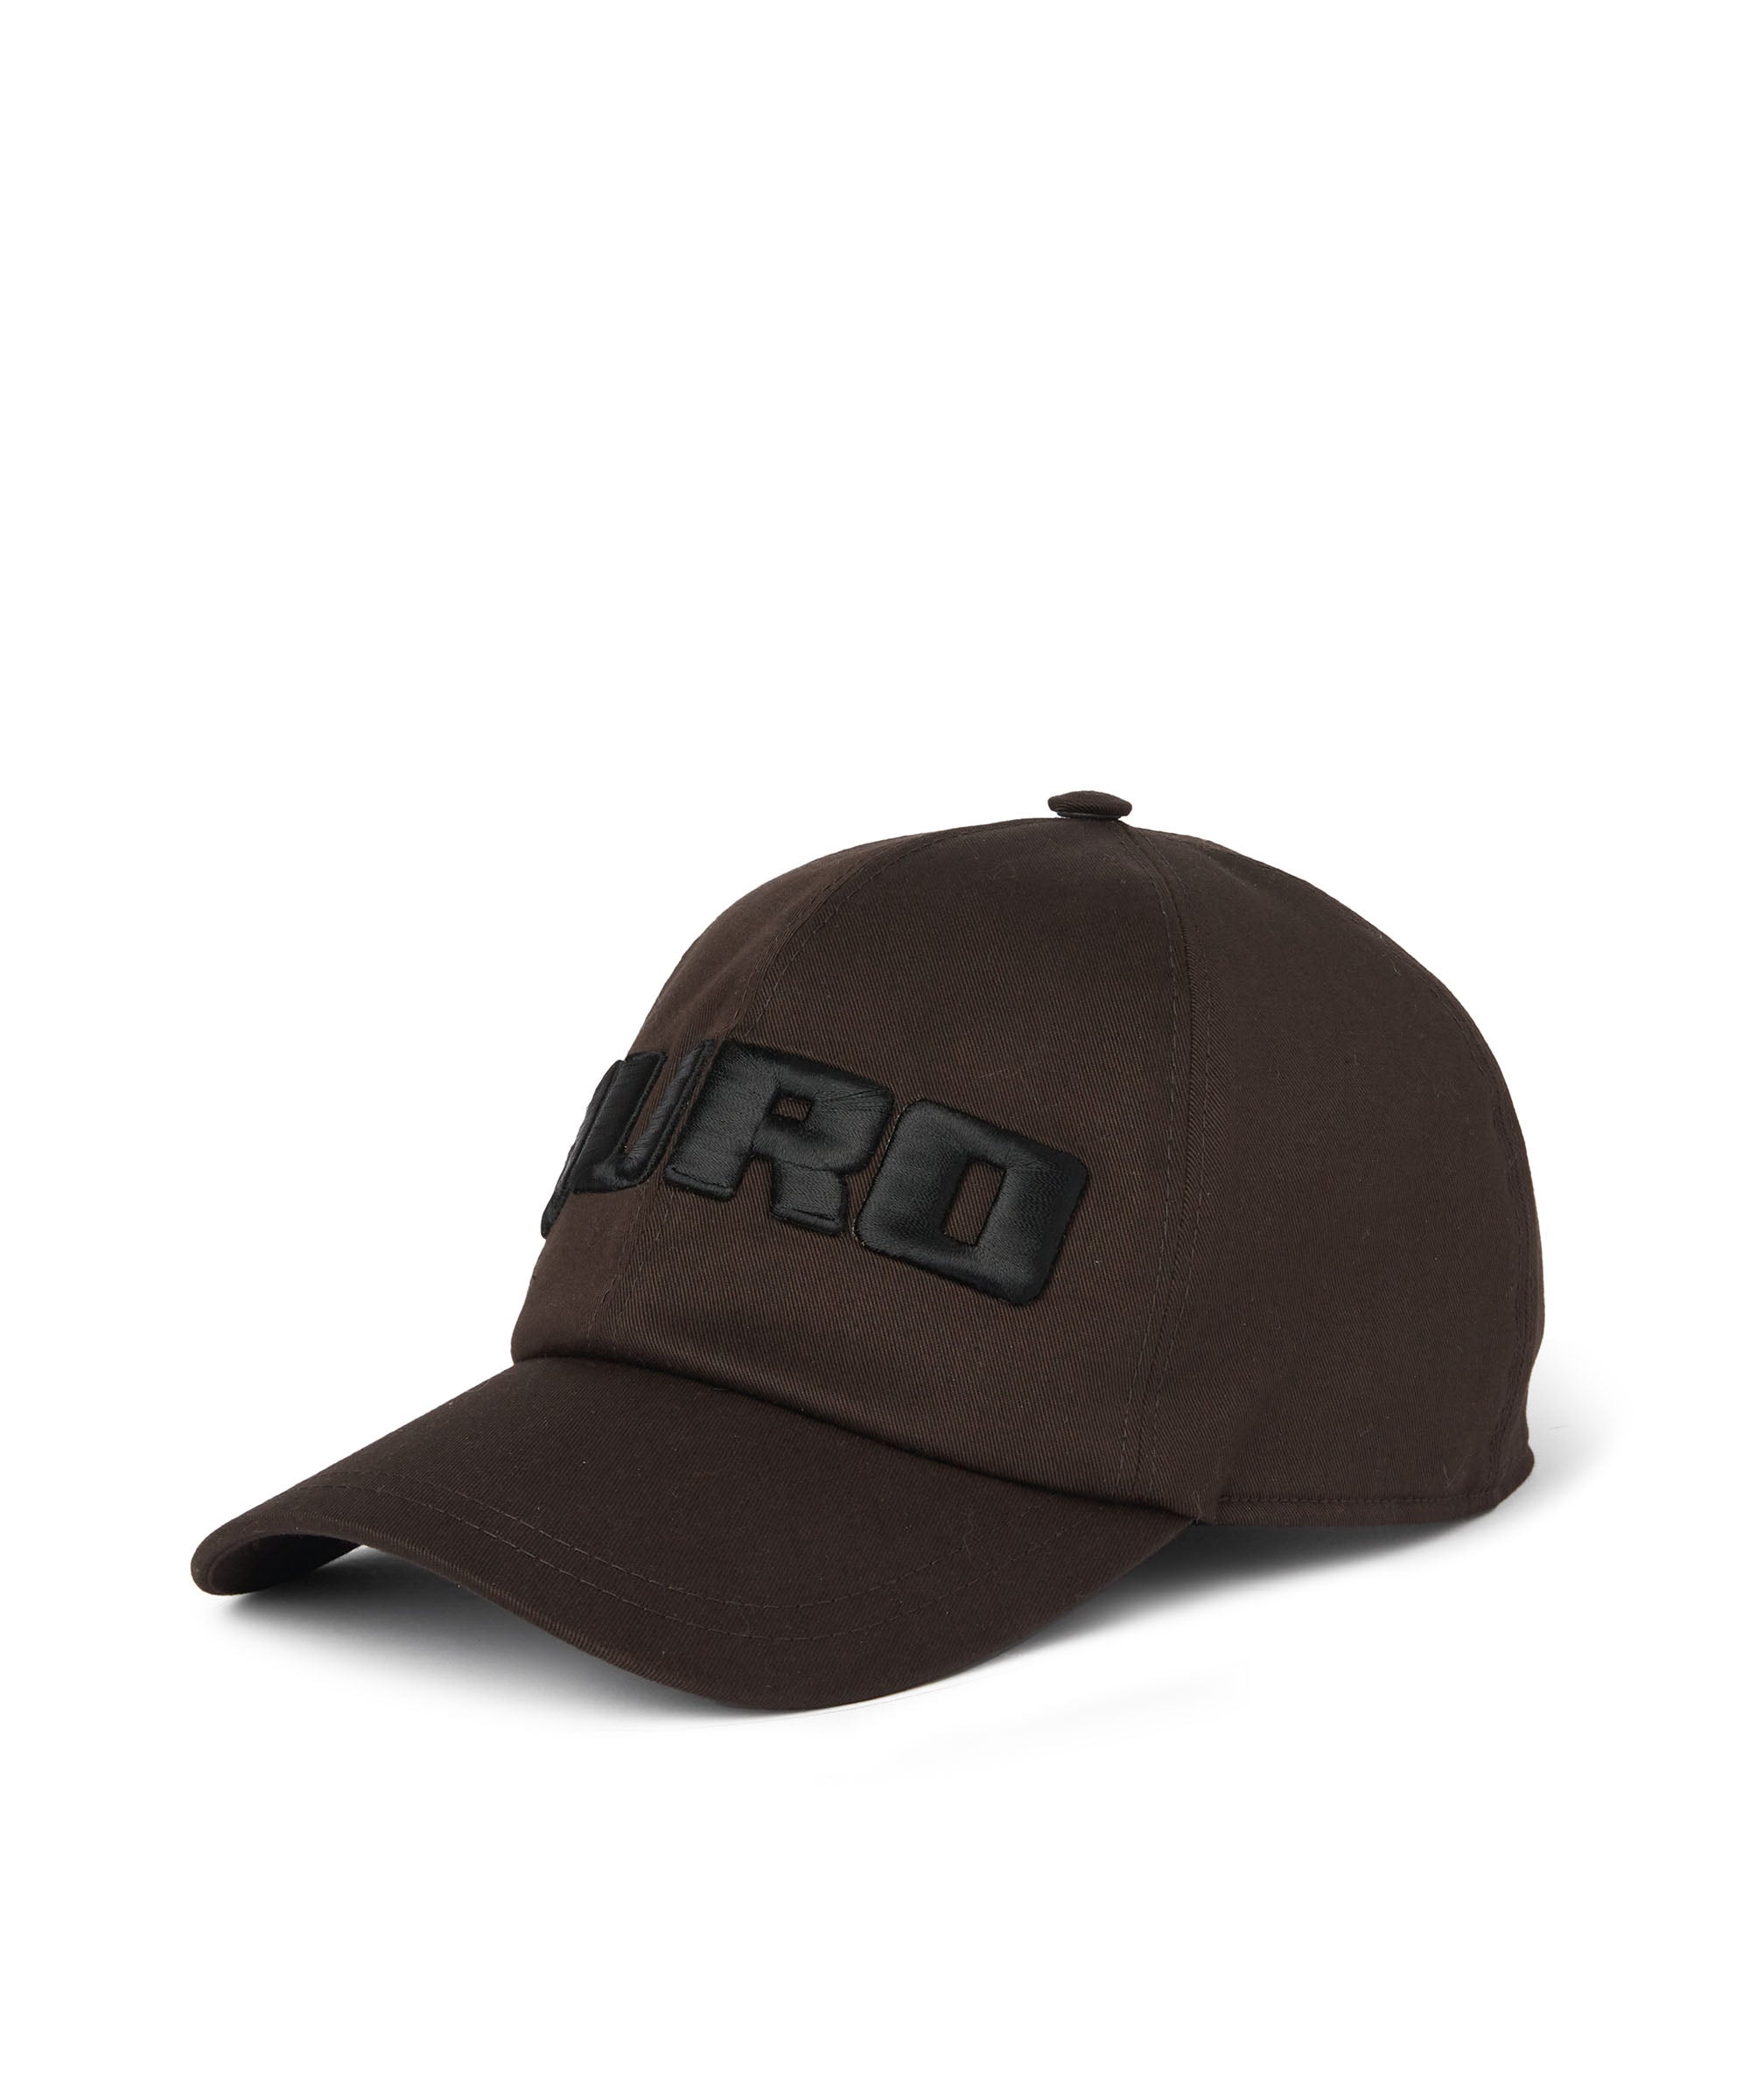 Baseball cap with embroidered  "duro" - 1